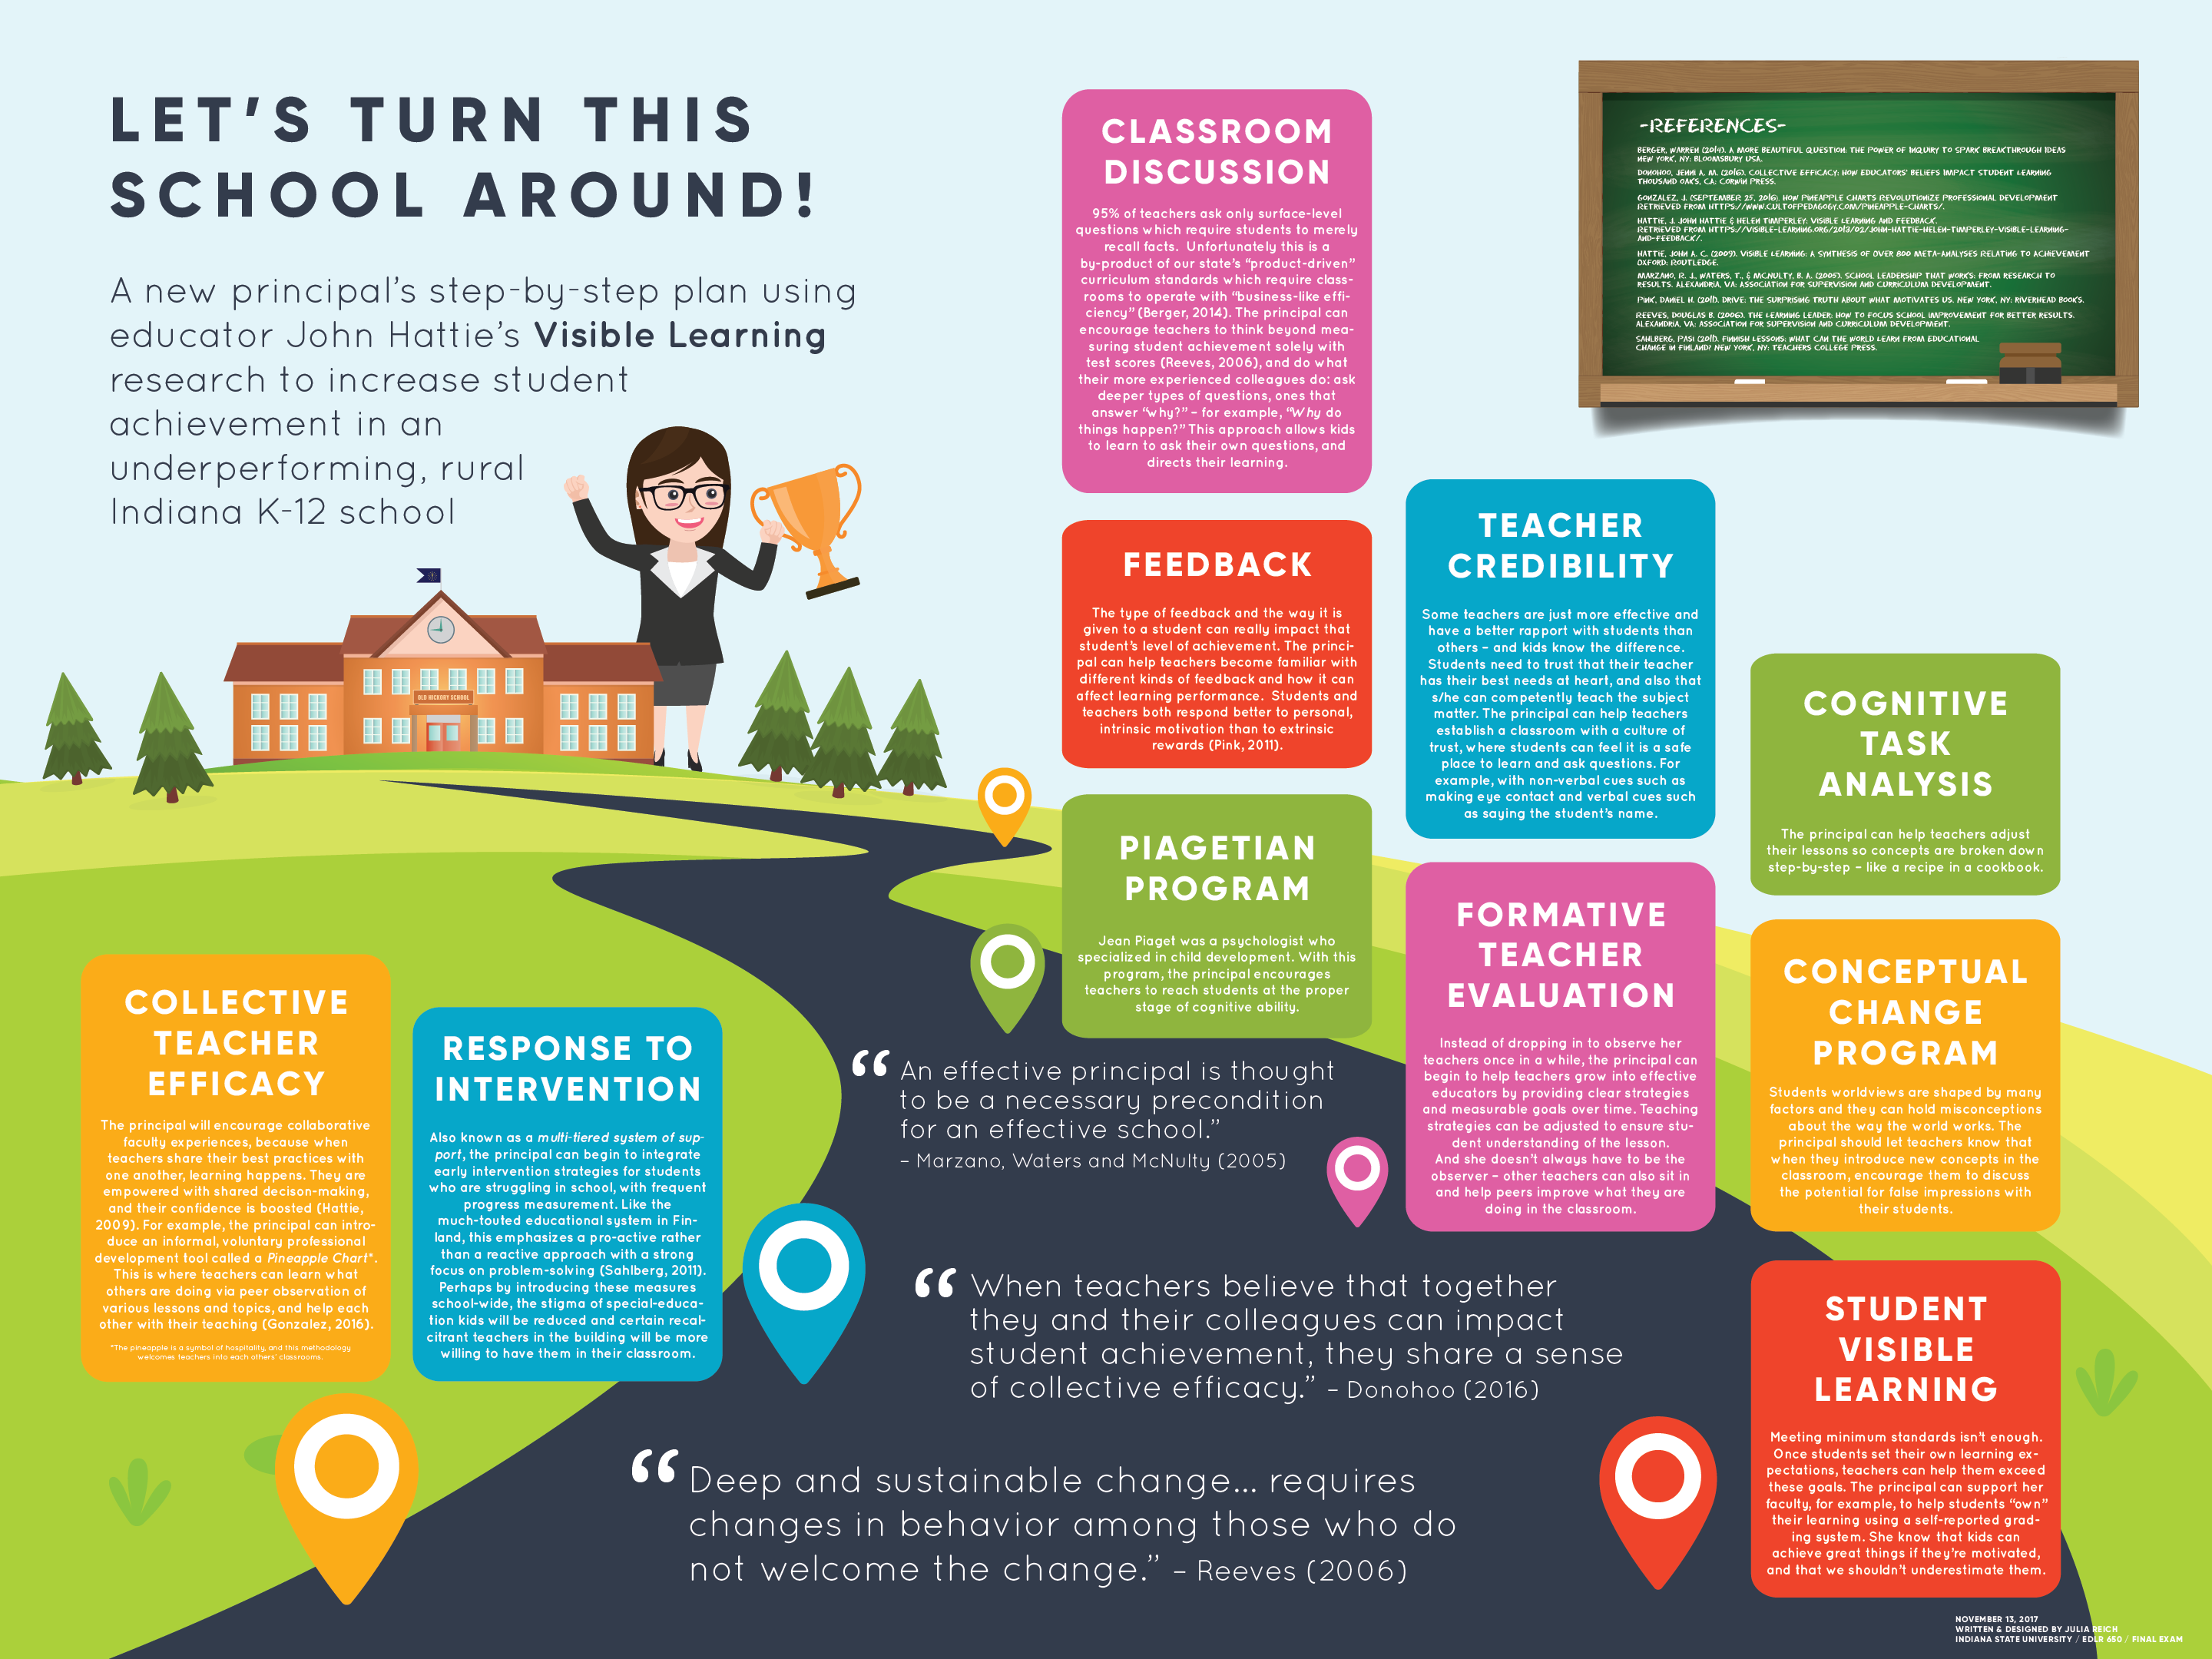 education infographic poster